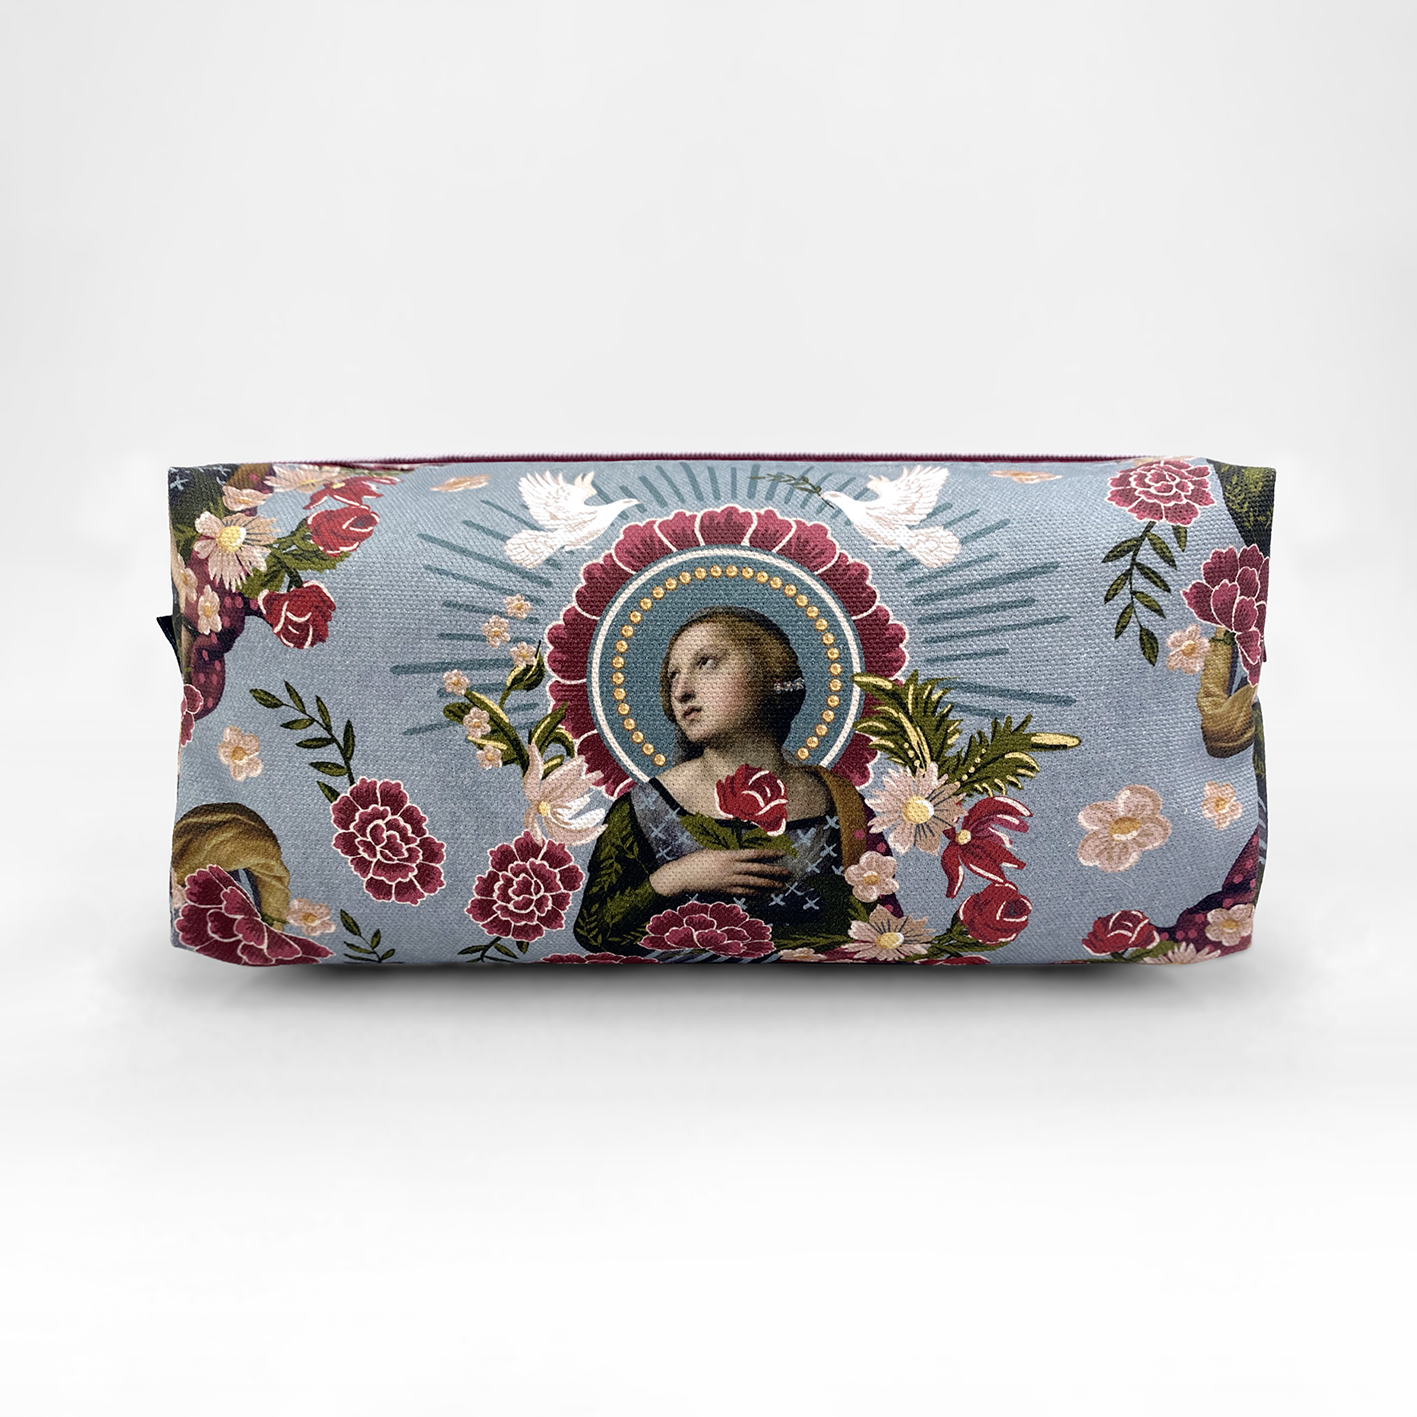 Box Cosmetic Bag for the National Gallery